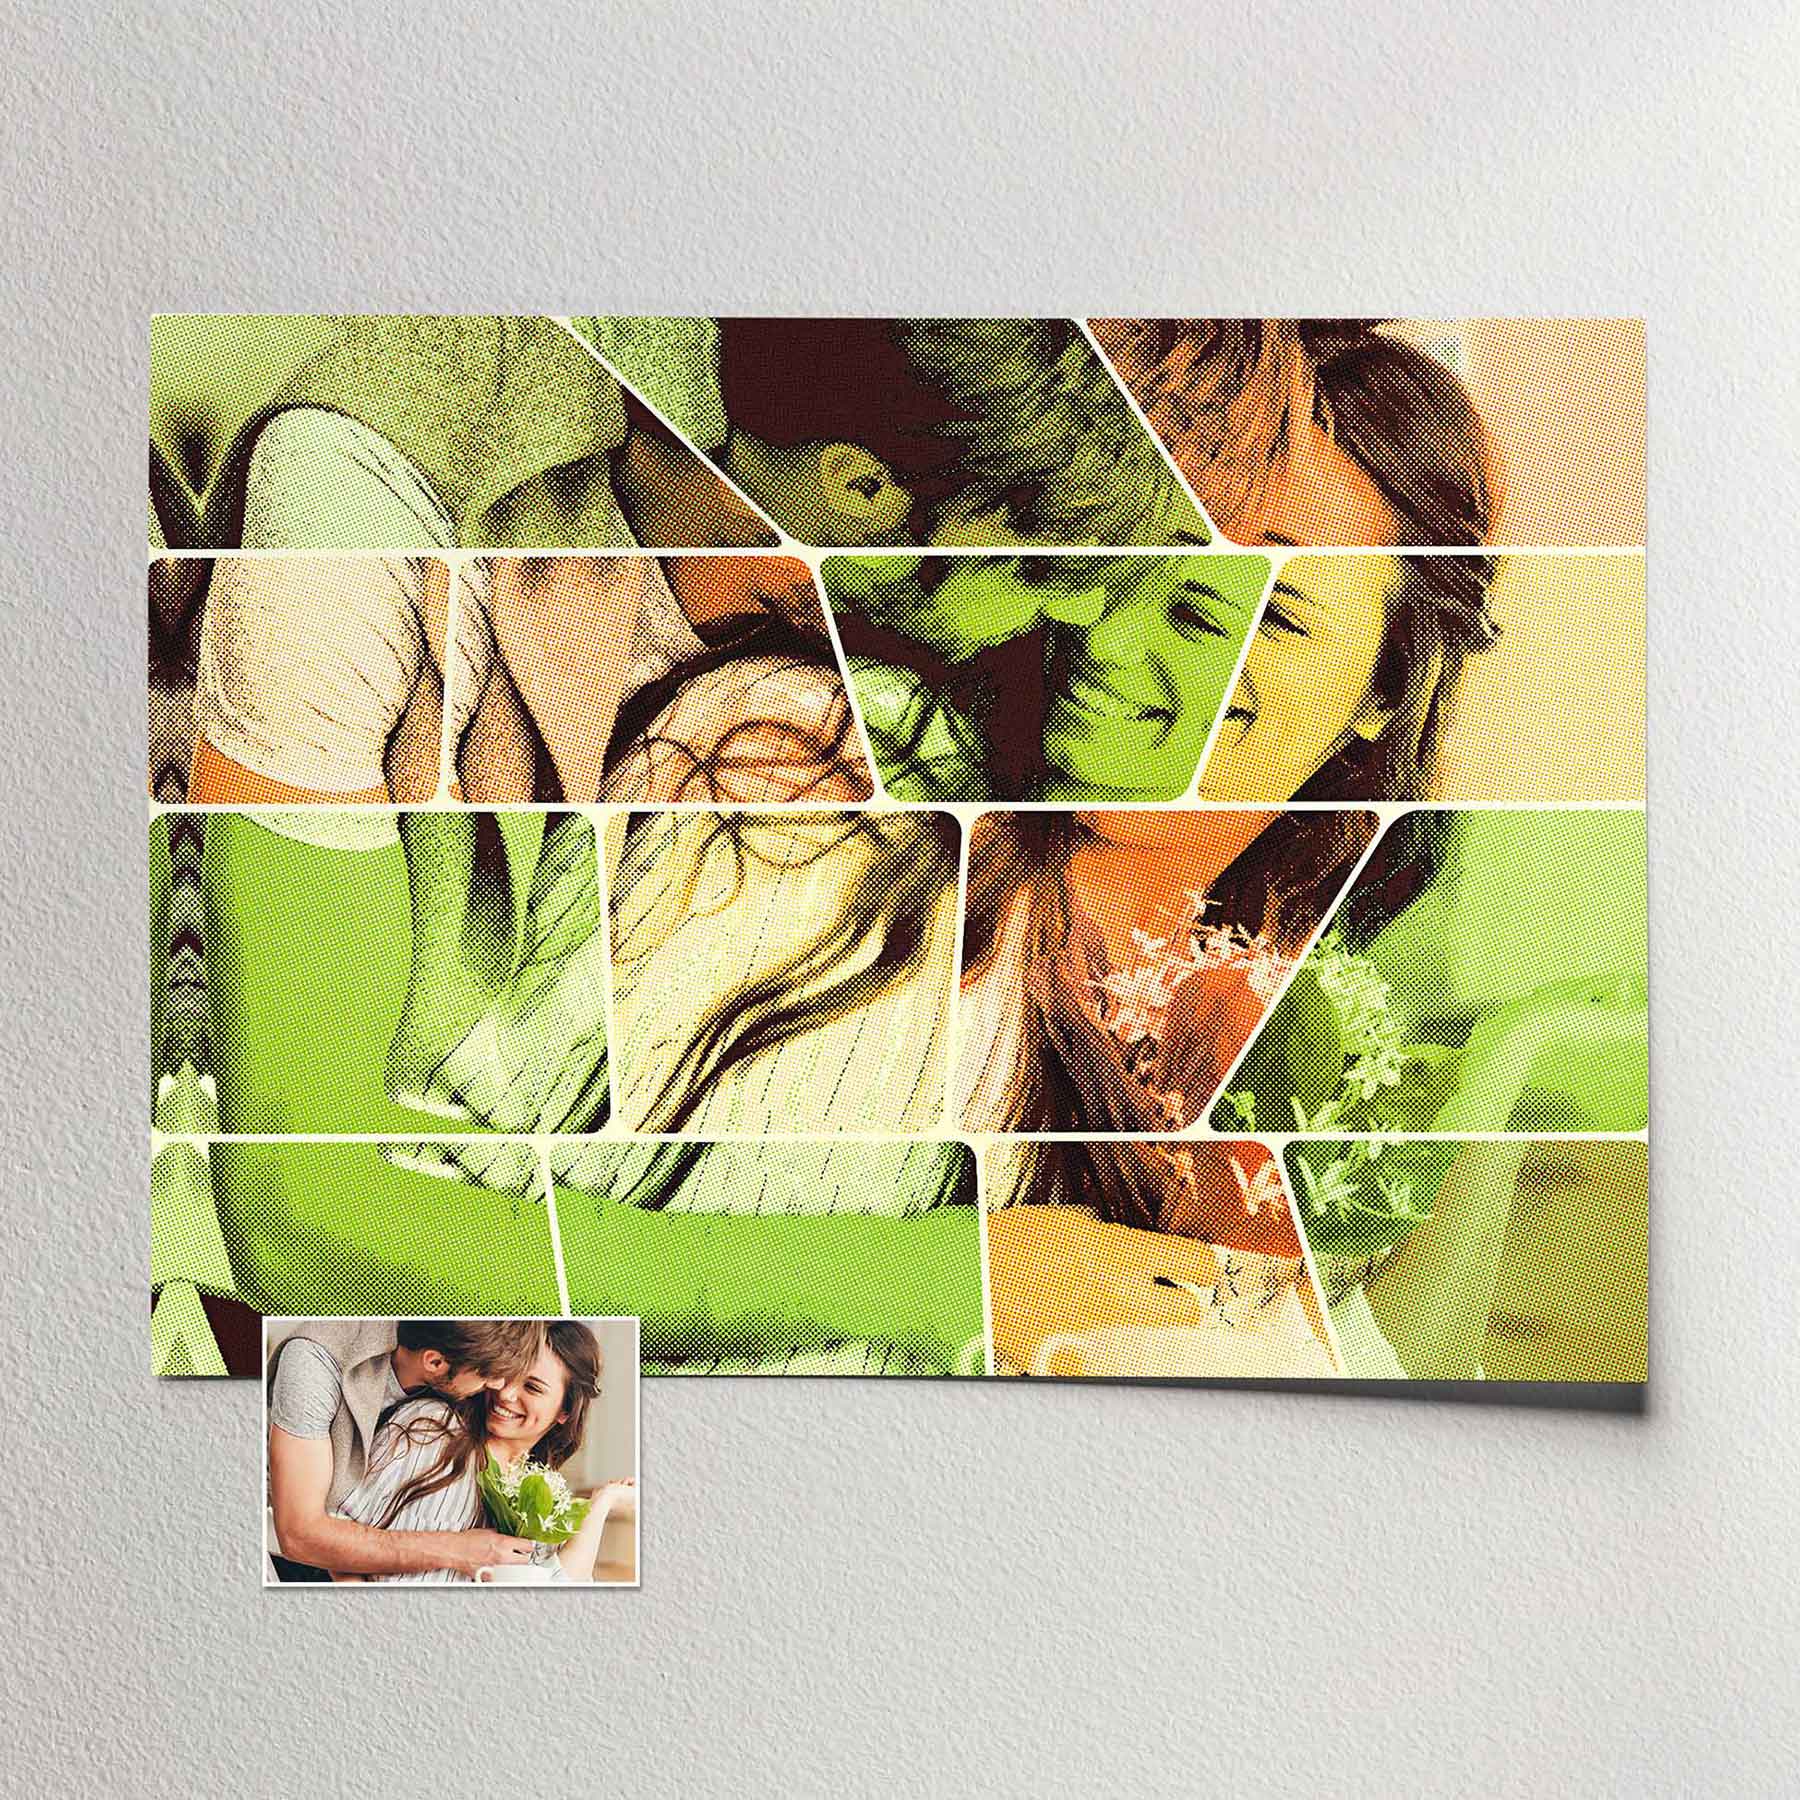 Embrace the retro allure of our Personalised Vintage Comics Print from photo. The orange and green hues, created by the retro comics filter, infuse an old school style and vibrant energy into your images, ultra cool and trendy wall art